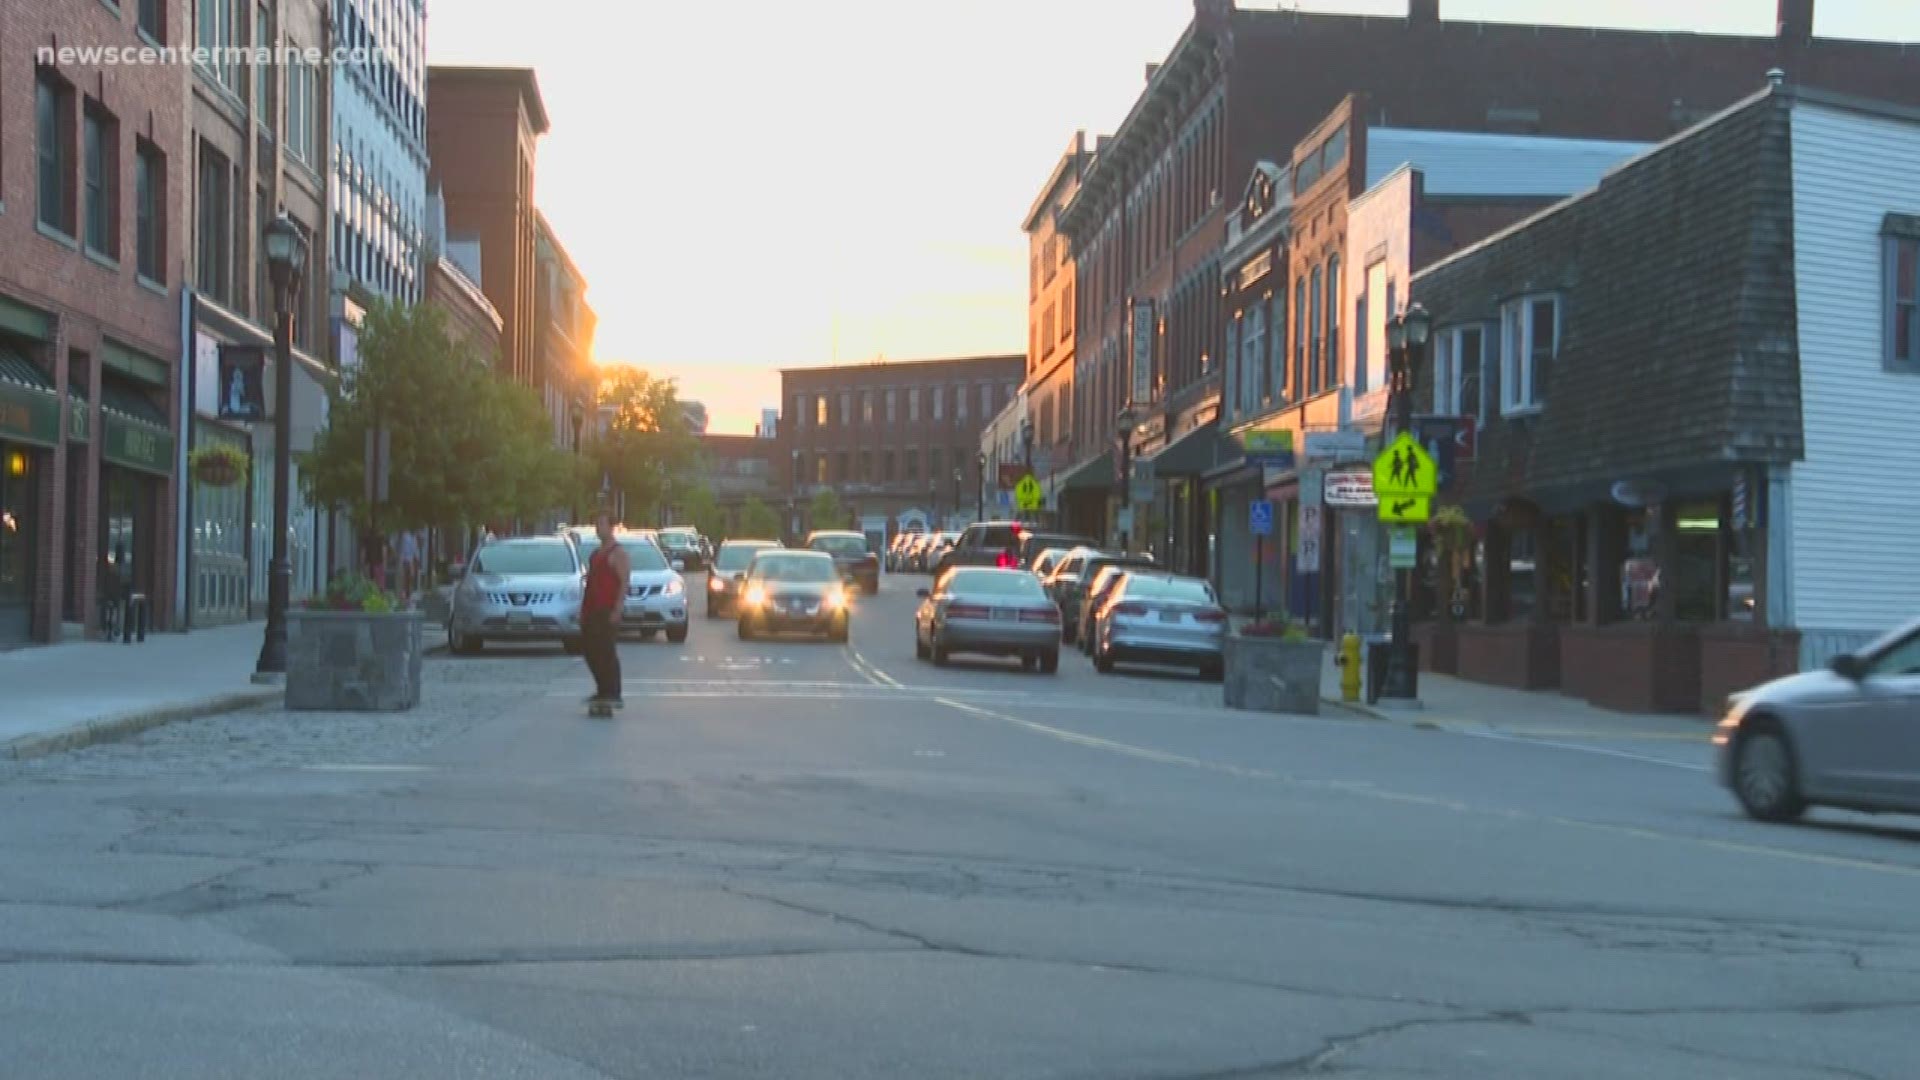 New parking fees and rules have been a big source of tension for the community of Biddeford.